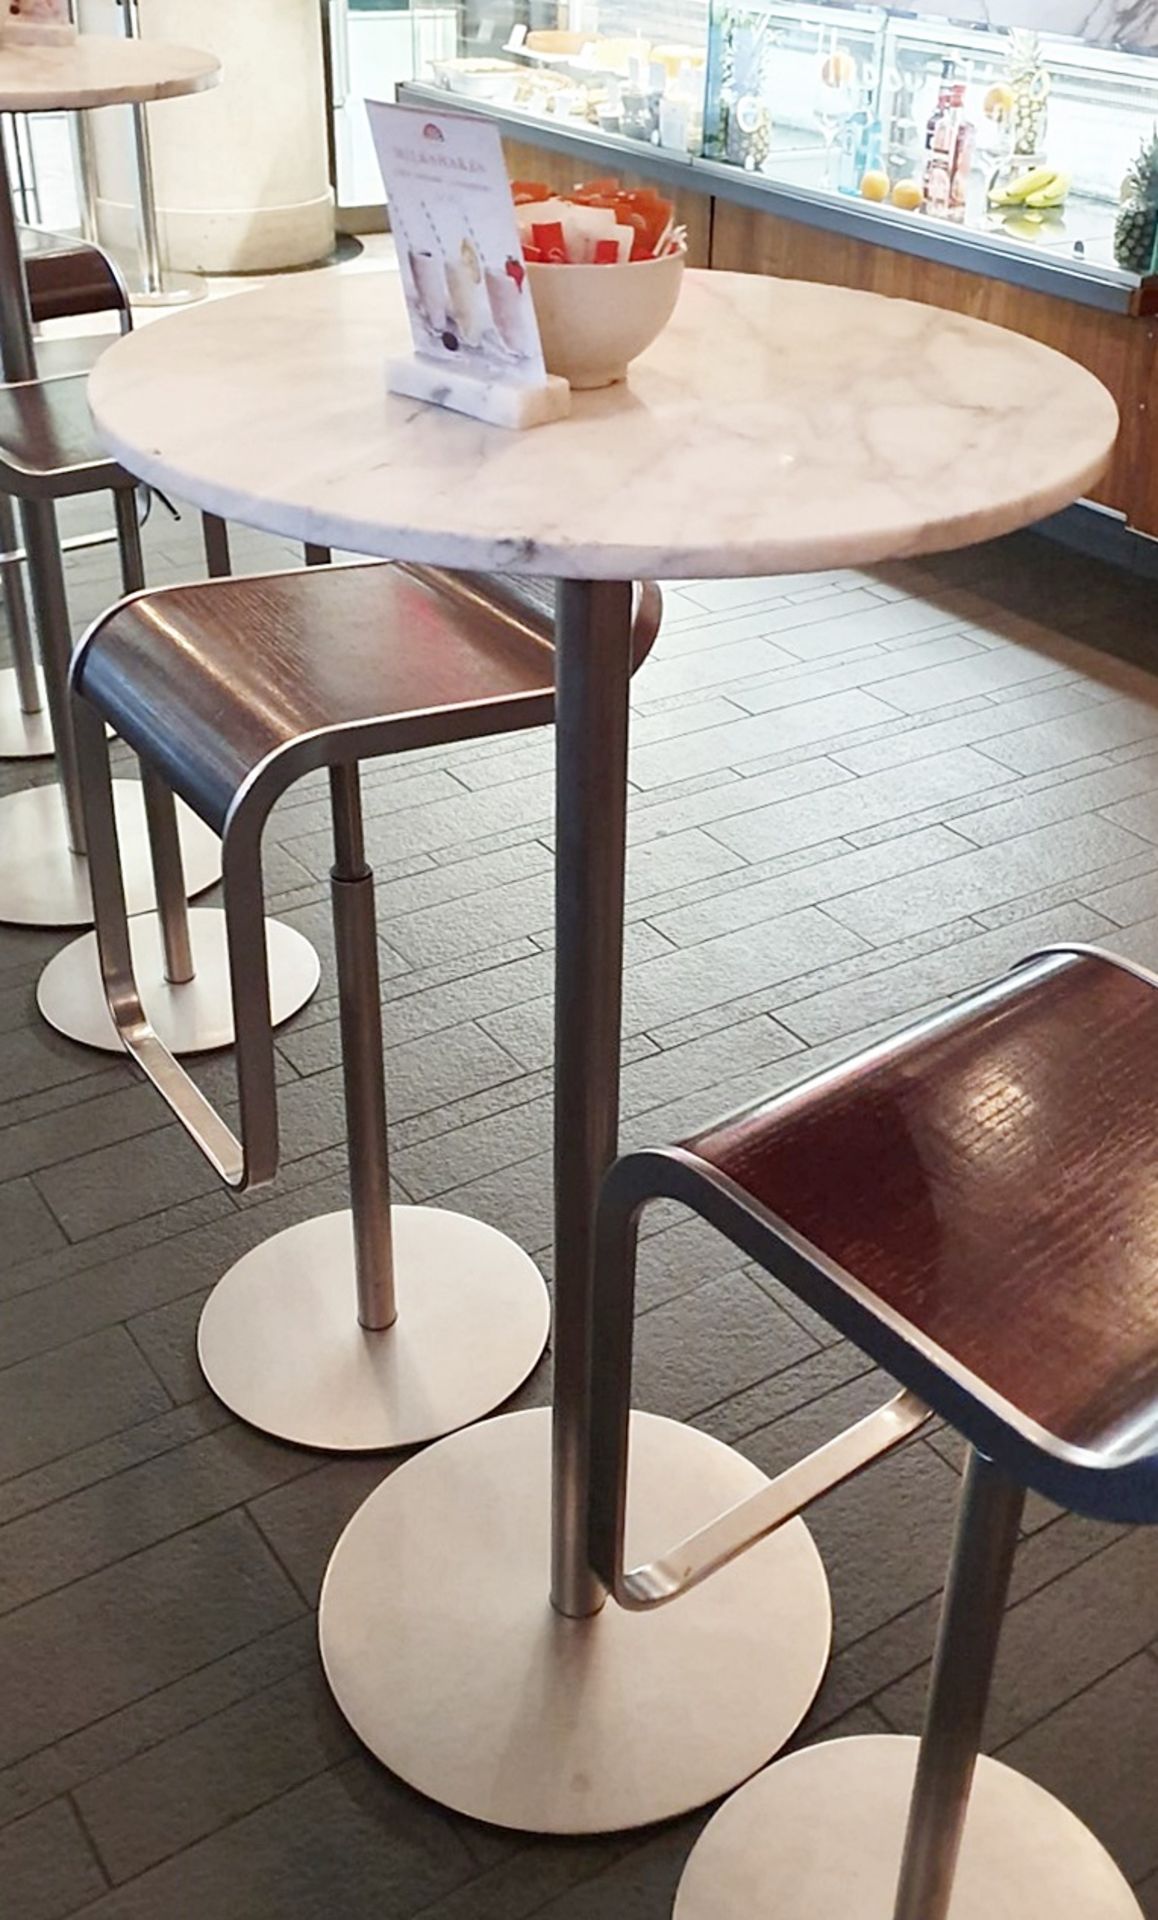 1 x Tall Round Marble/Granite Cocktail Bar Table - Dimensions: Diameter 60cm x Height 111cm - Ref: